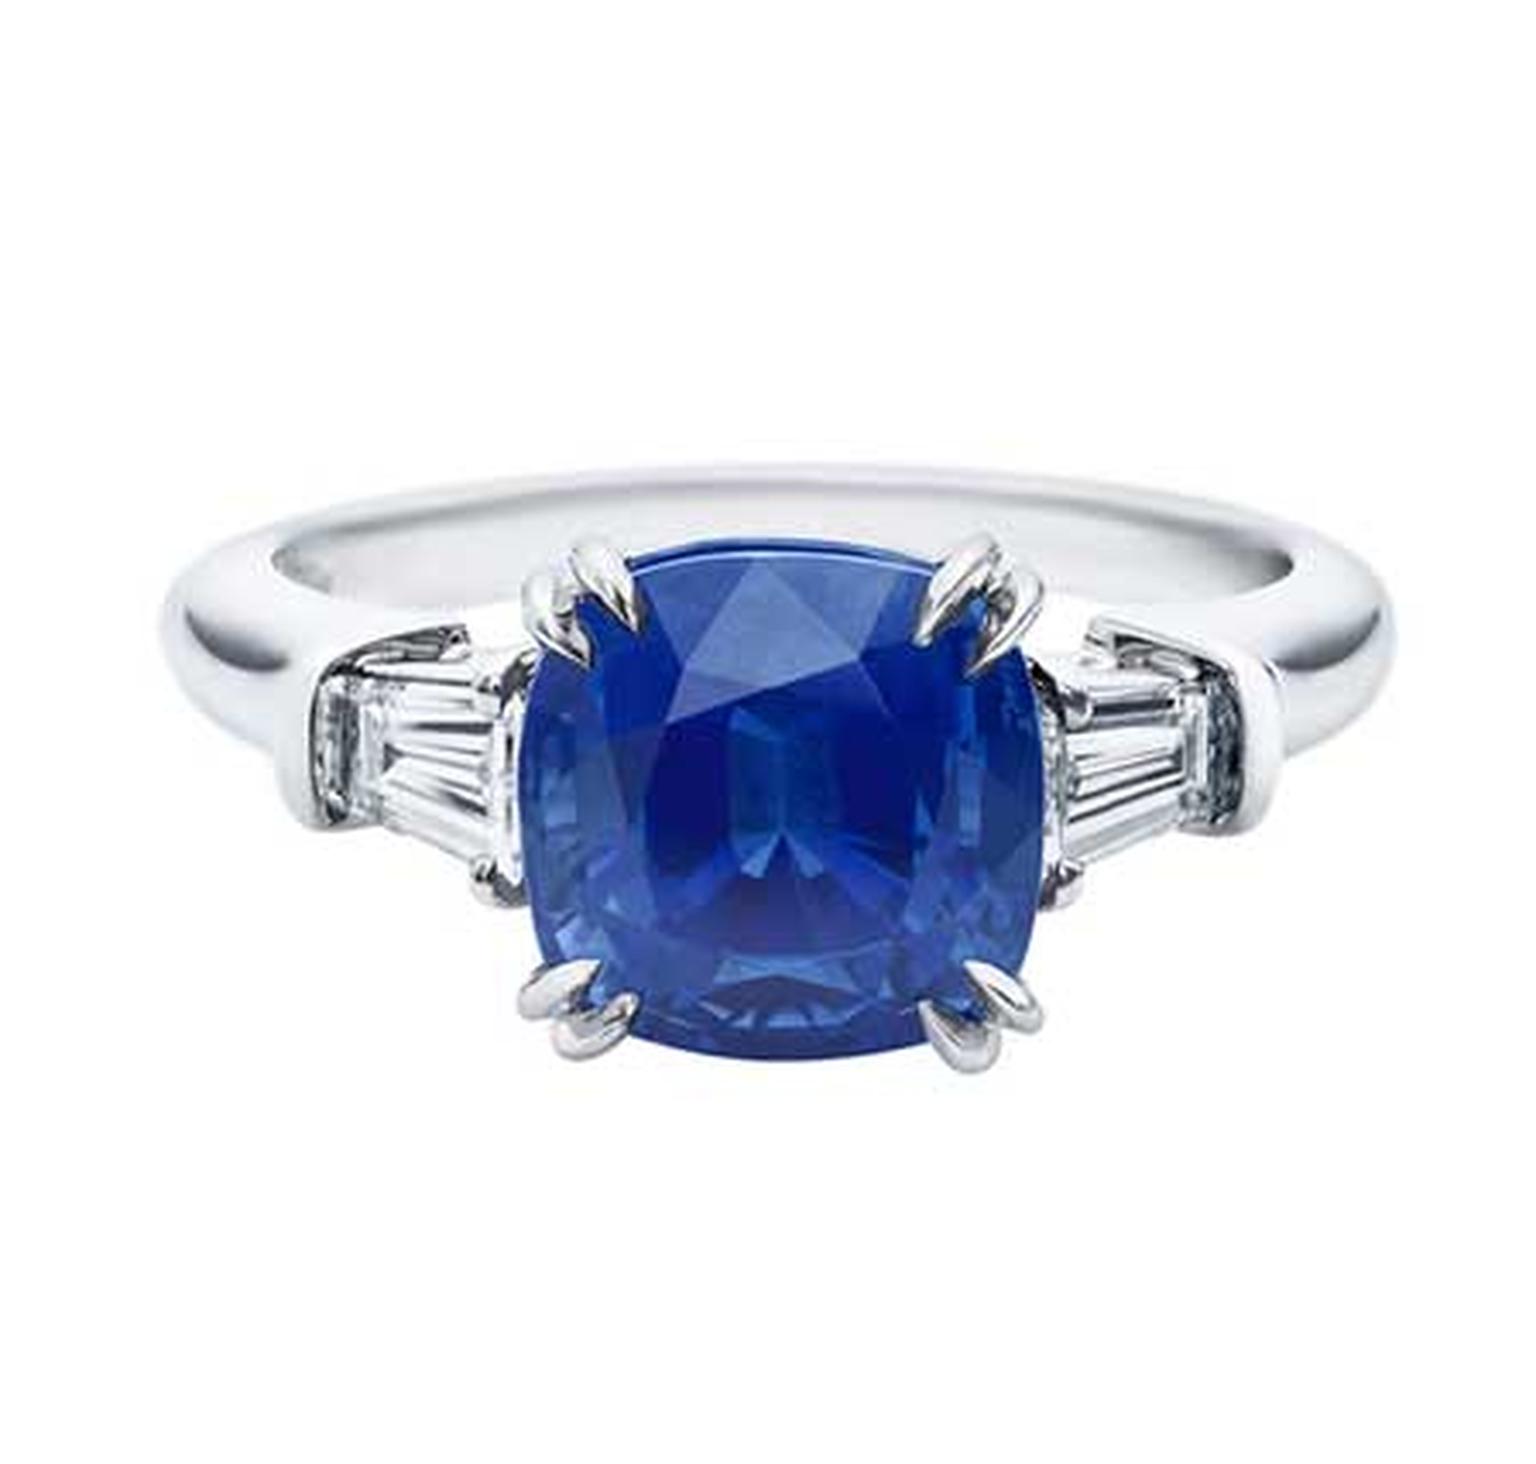 Harry Winston Classic Winston cushion-cut sapphire engagement ring in platinum, set with a 3.62ct sapphire with tapered baguette diamond side stones.